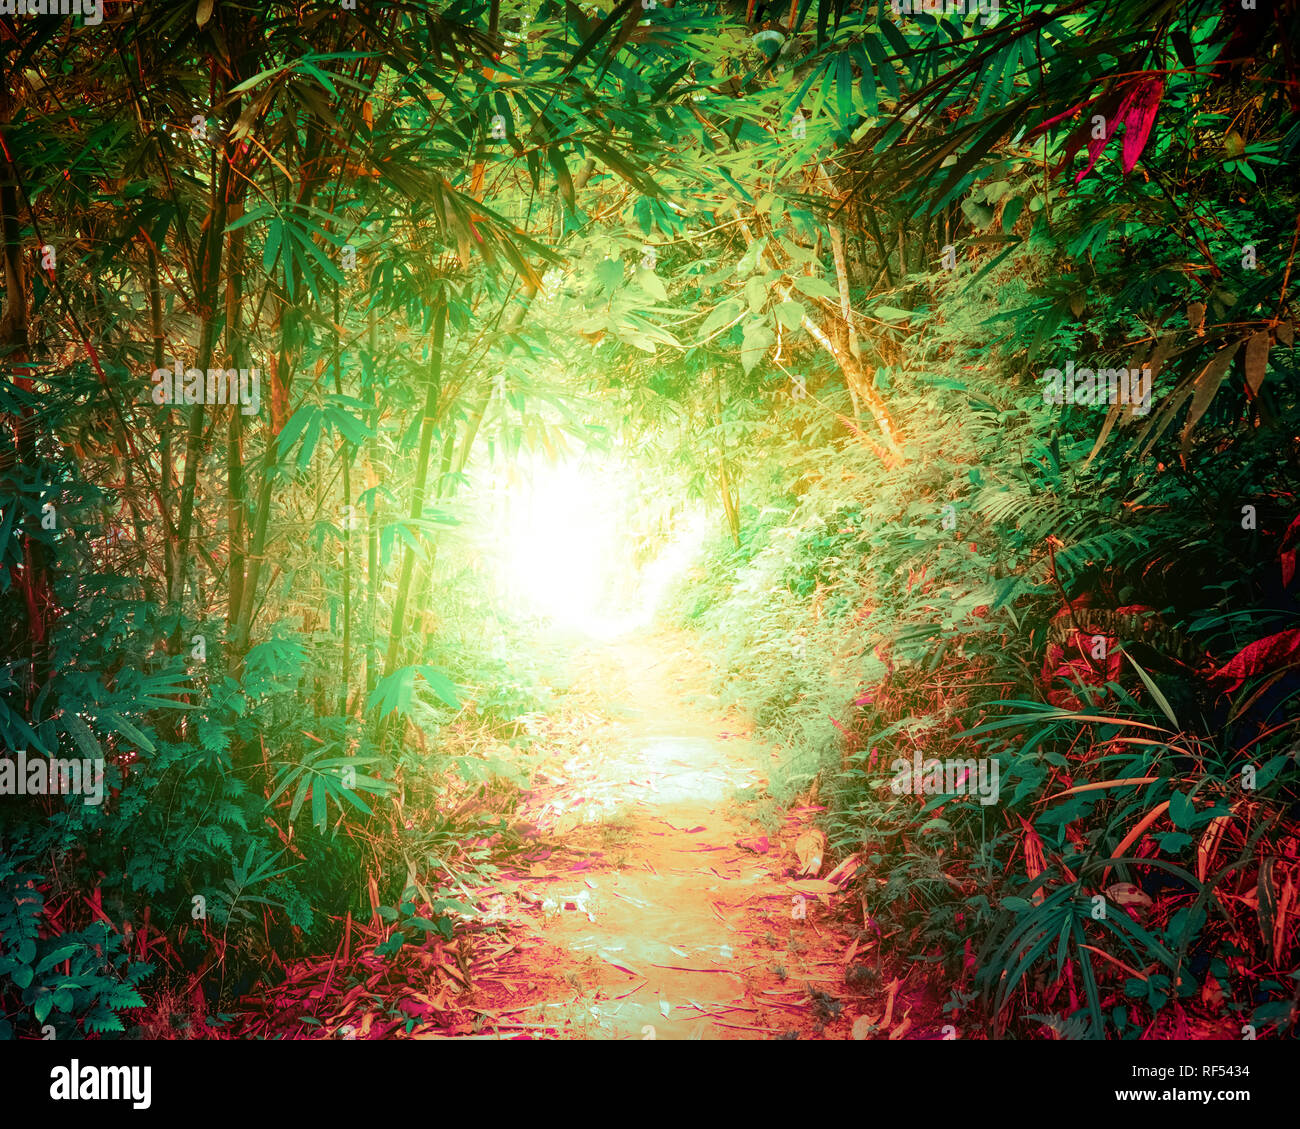 Surreal colors of fantasy landscape at tropical jungle forest with tunnel and path way through dense vegetation Stock Photo